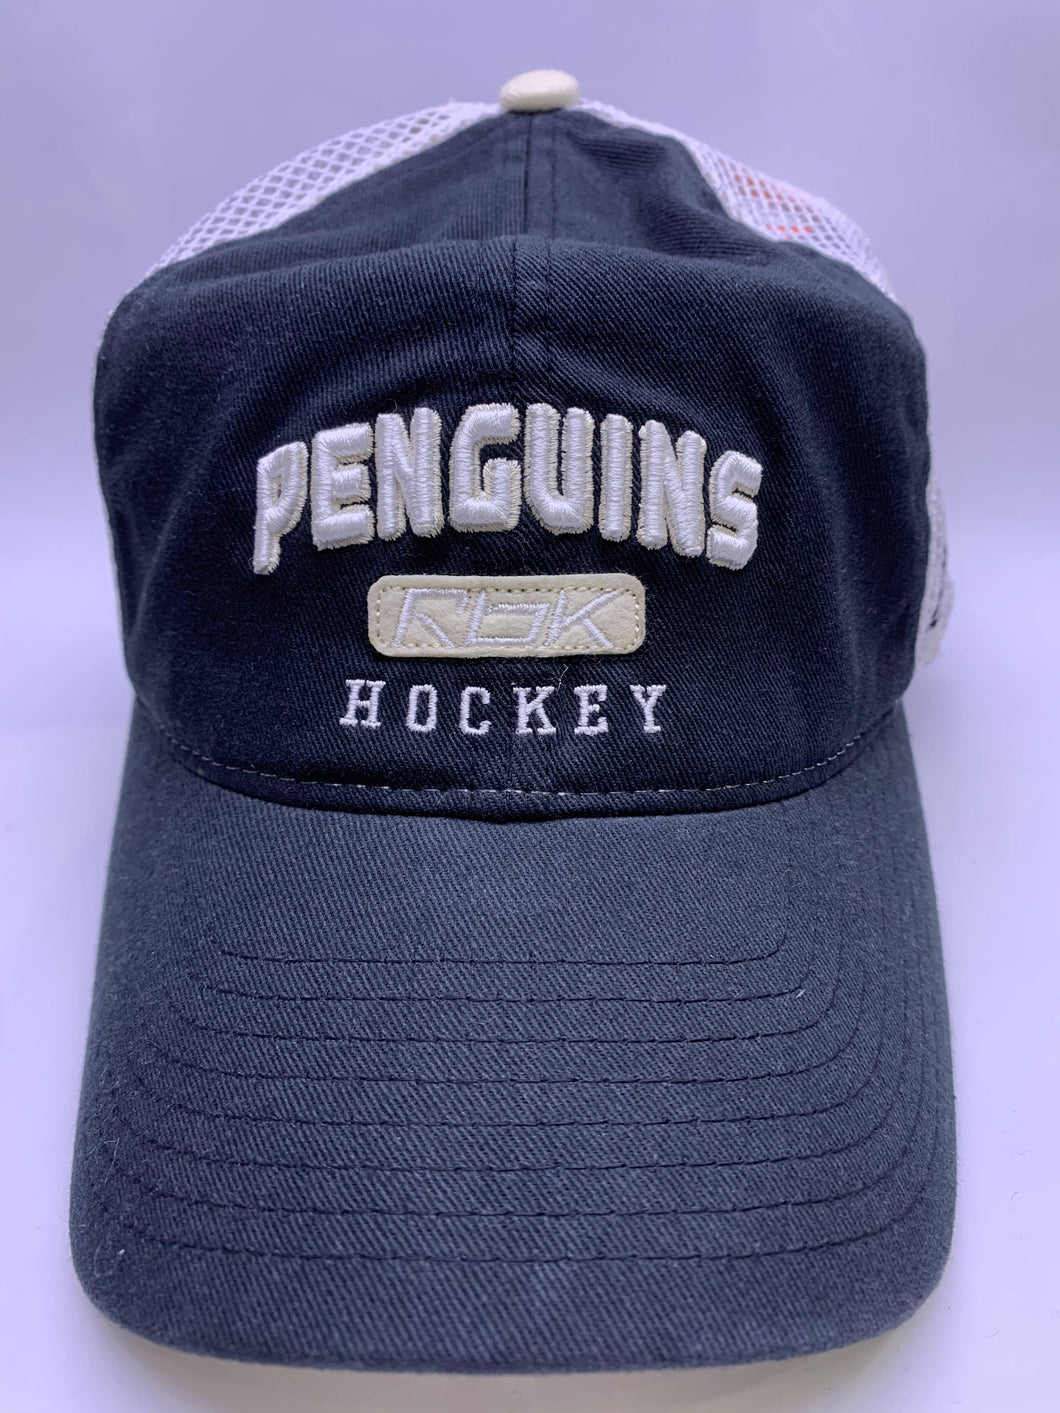 Pittsburgh Penguins RBK flex cap one size Fit All